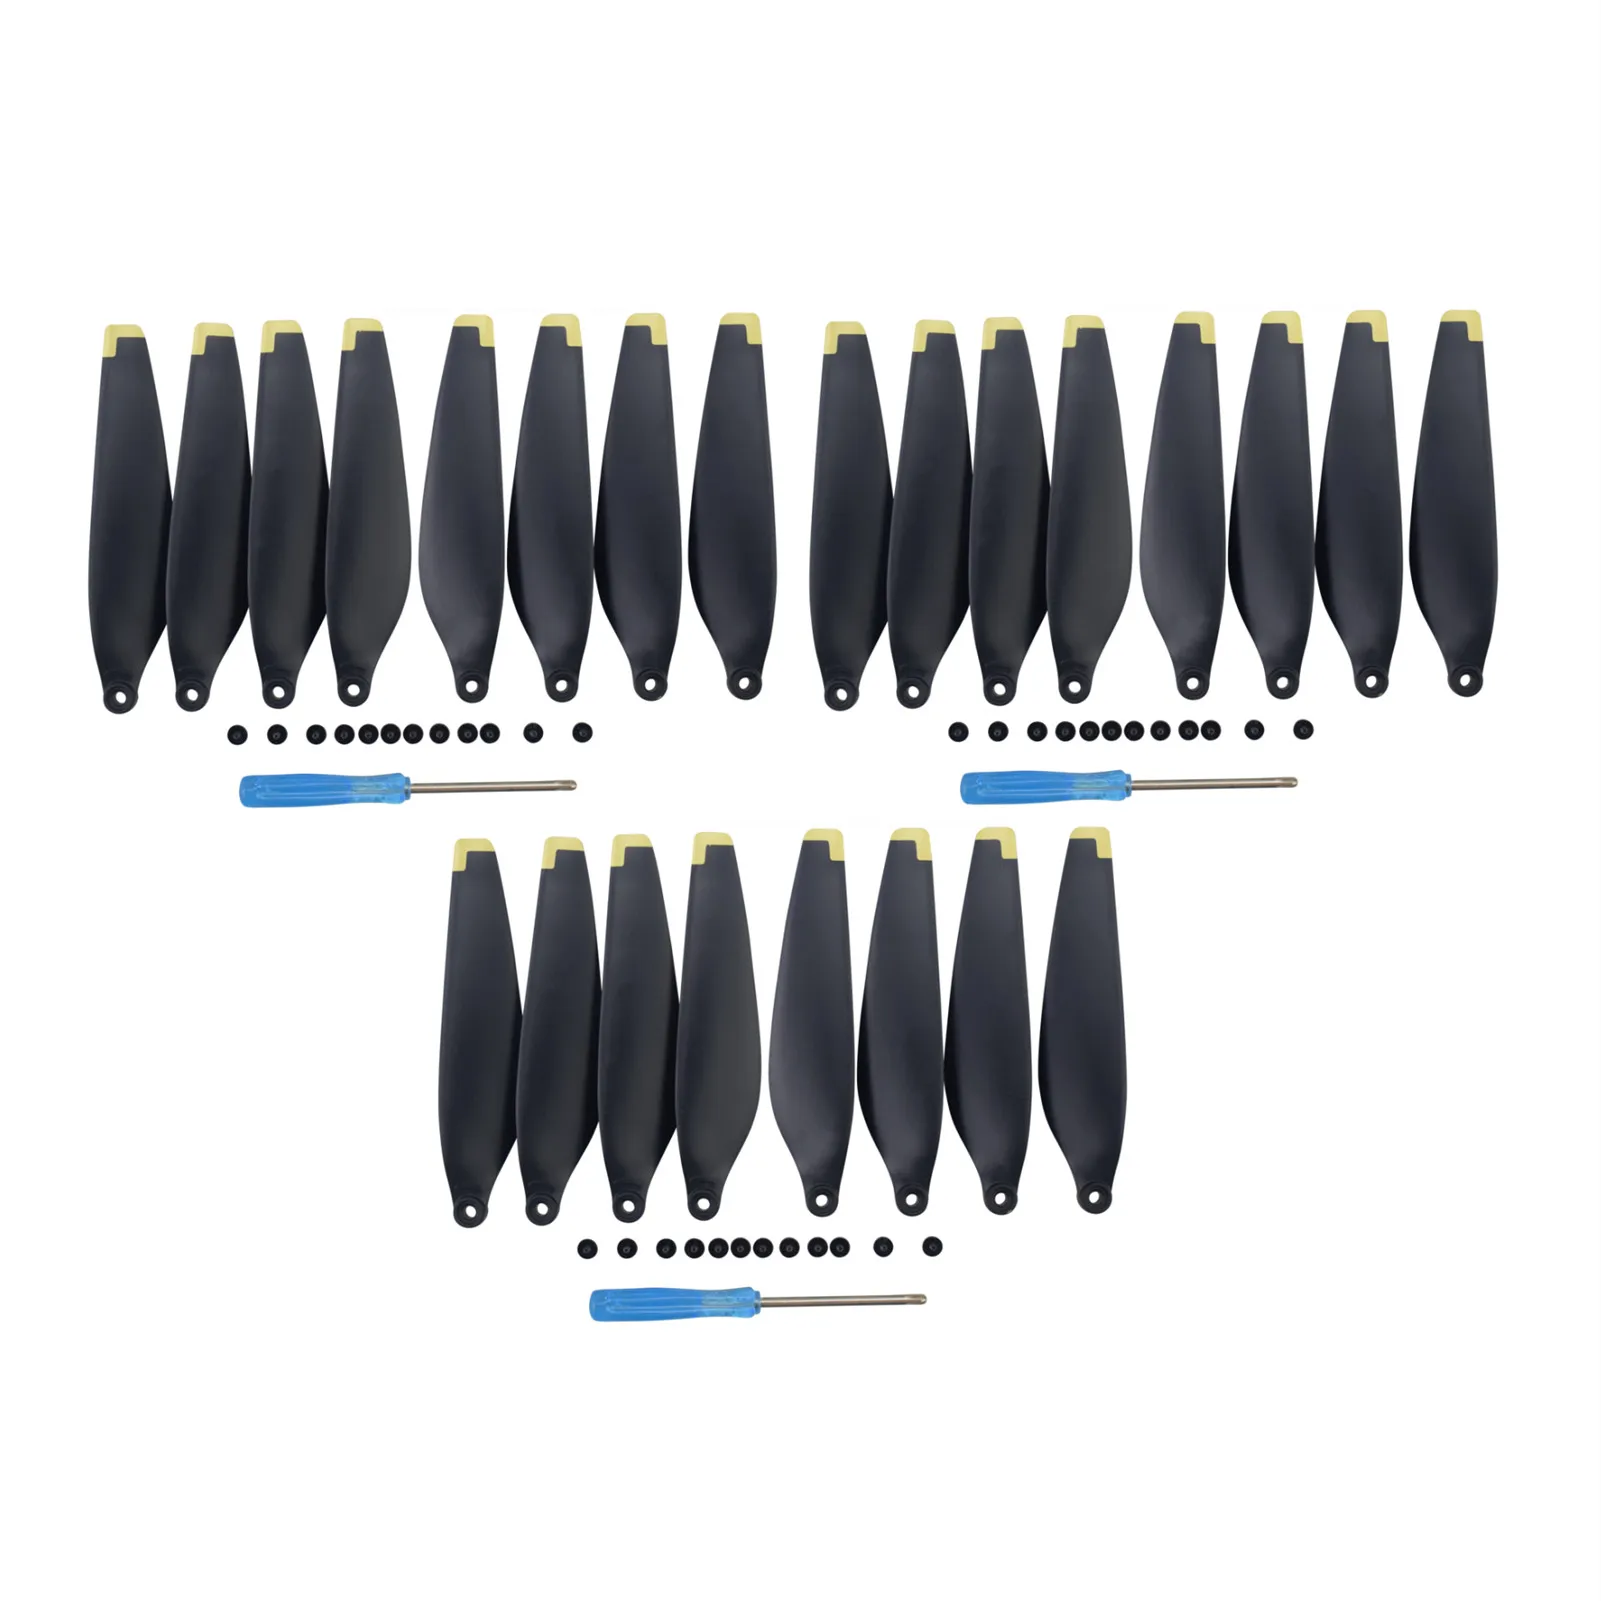 

24PCS(6 Pairs)Propellers For DJI Mini 3 Pro RC Drone Blades Mavic Mini 3 Pro Four Axis Aircraft Noise Reduction Blade Parts